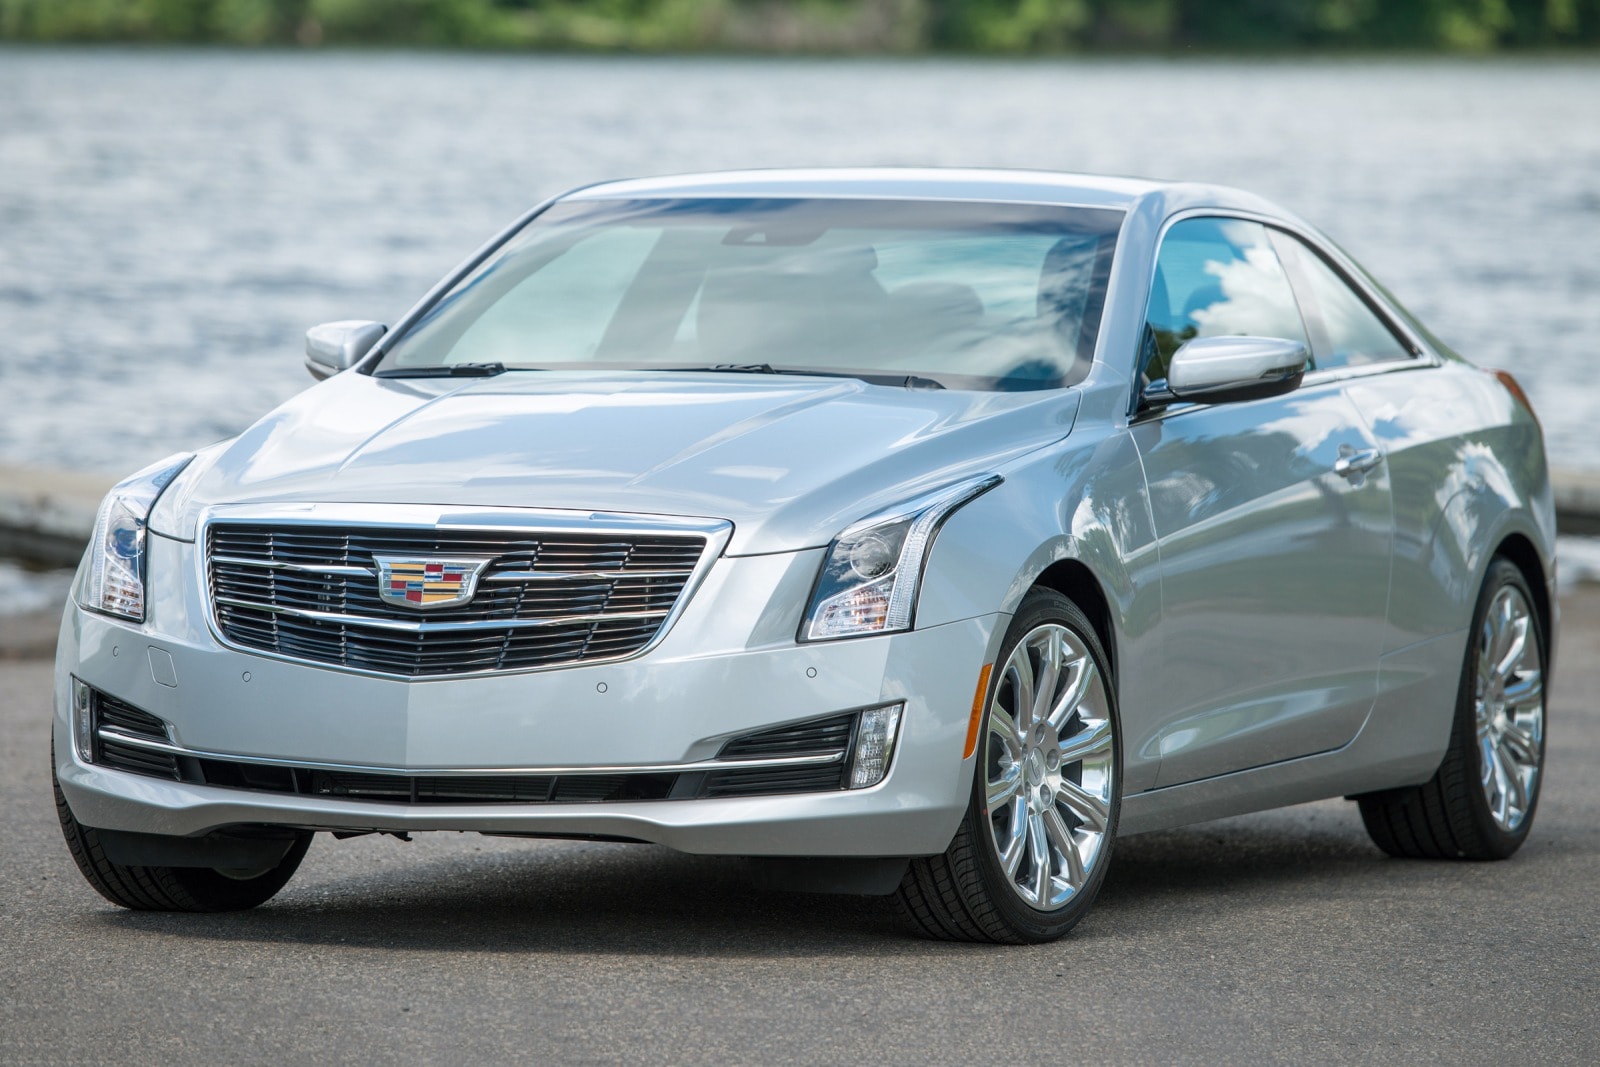 2015 Cadillac ATS Coupe Review & Ratings | Edmunds